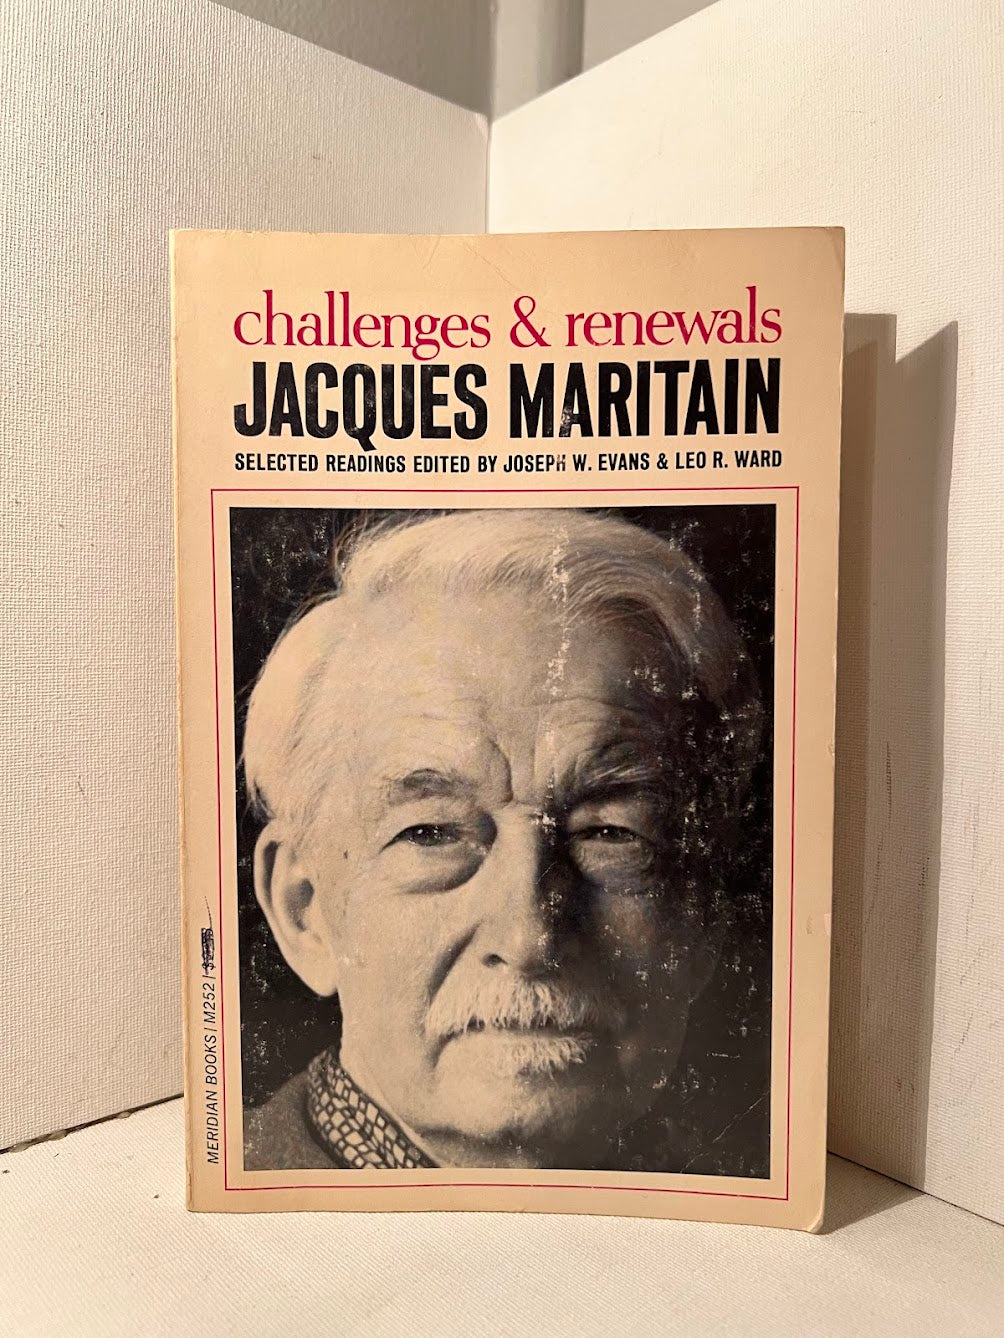 Challenges & Renewals by Jacques Maritain